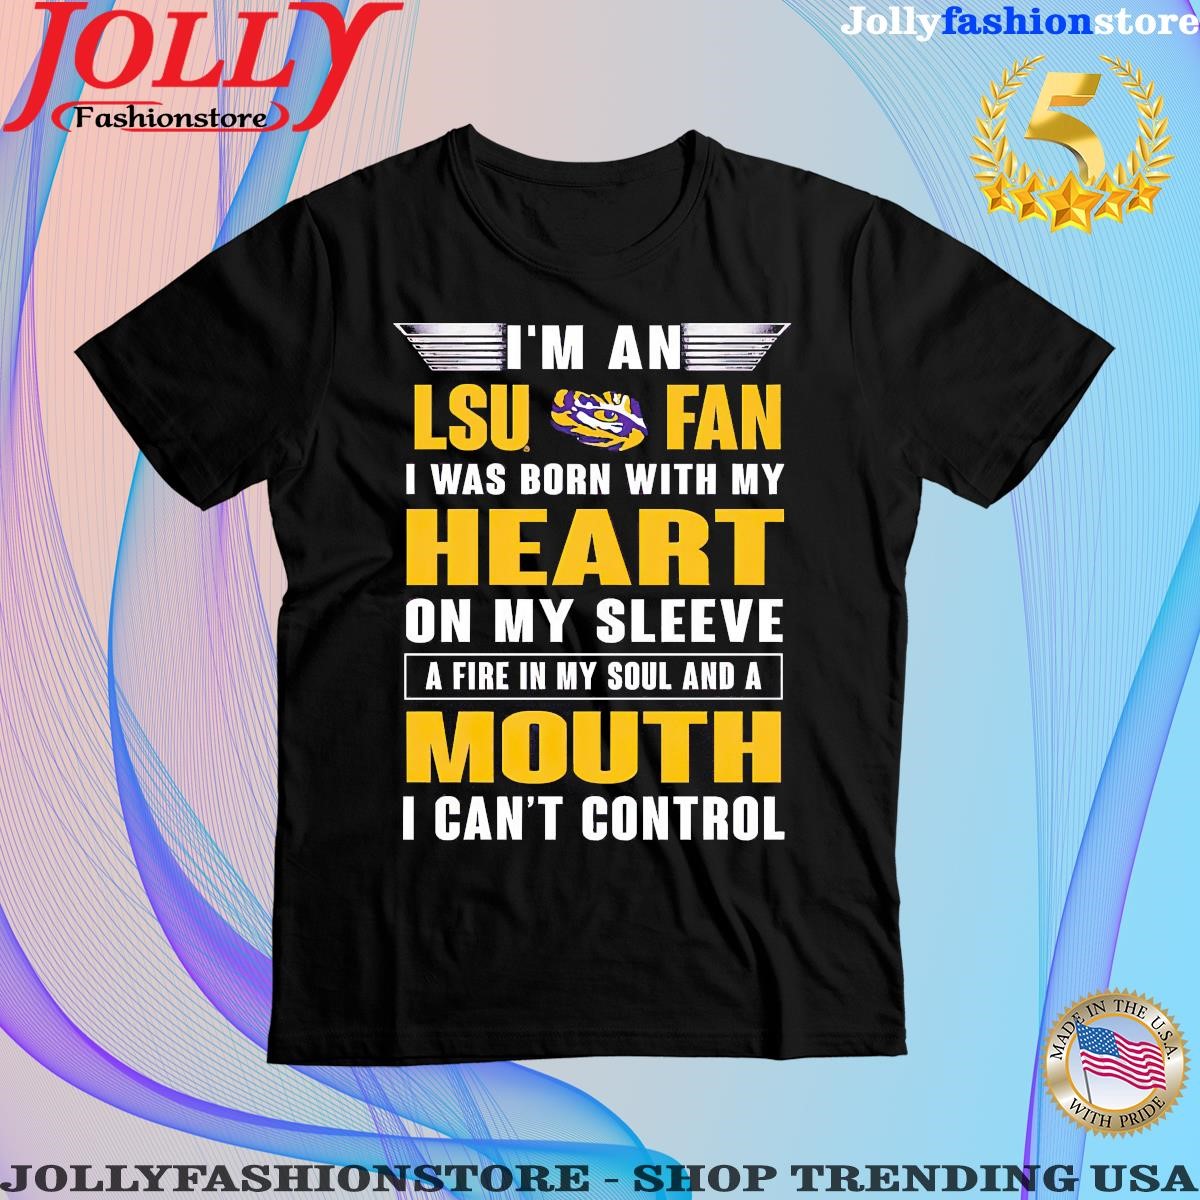 I'm an lsu fan I was born with my heart on my sleeve a fire in my soul and a mouth I can't control Shirt